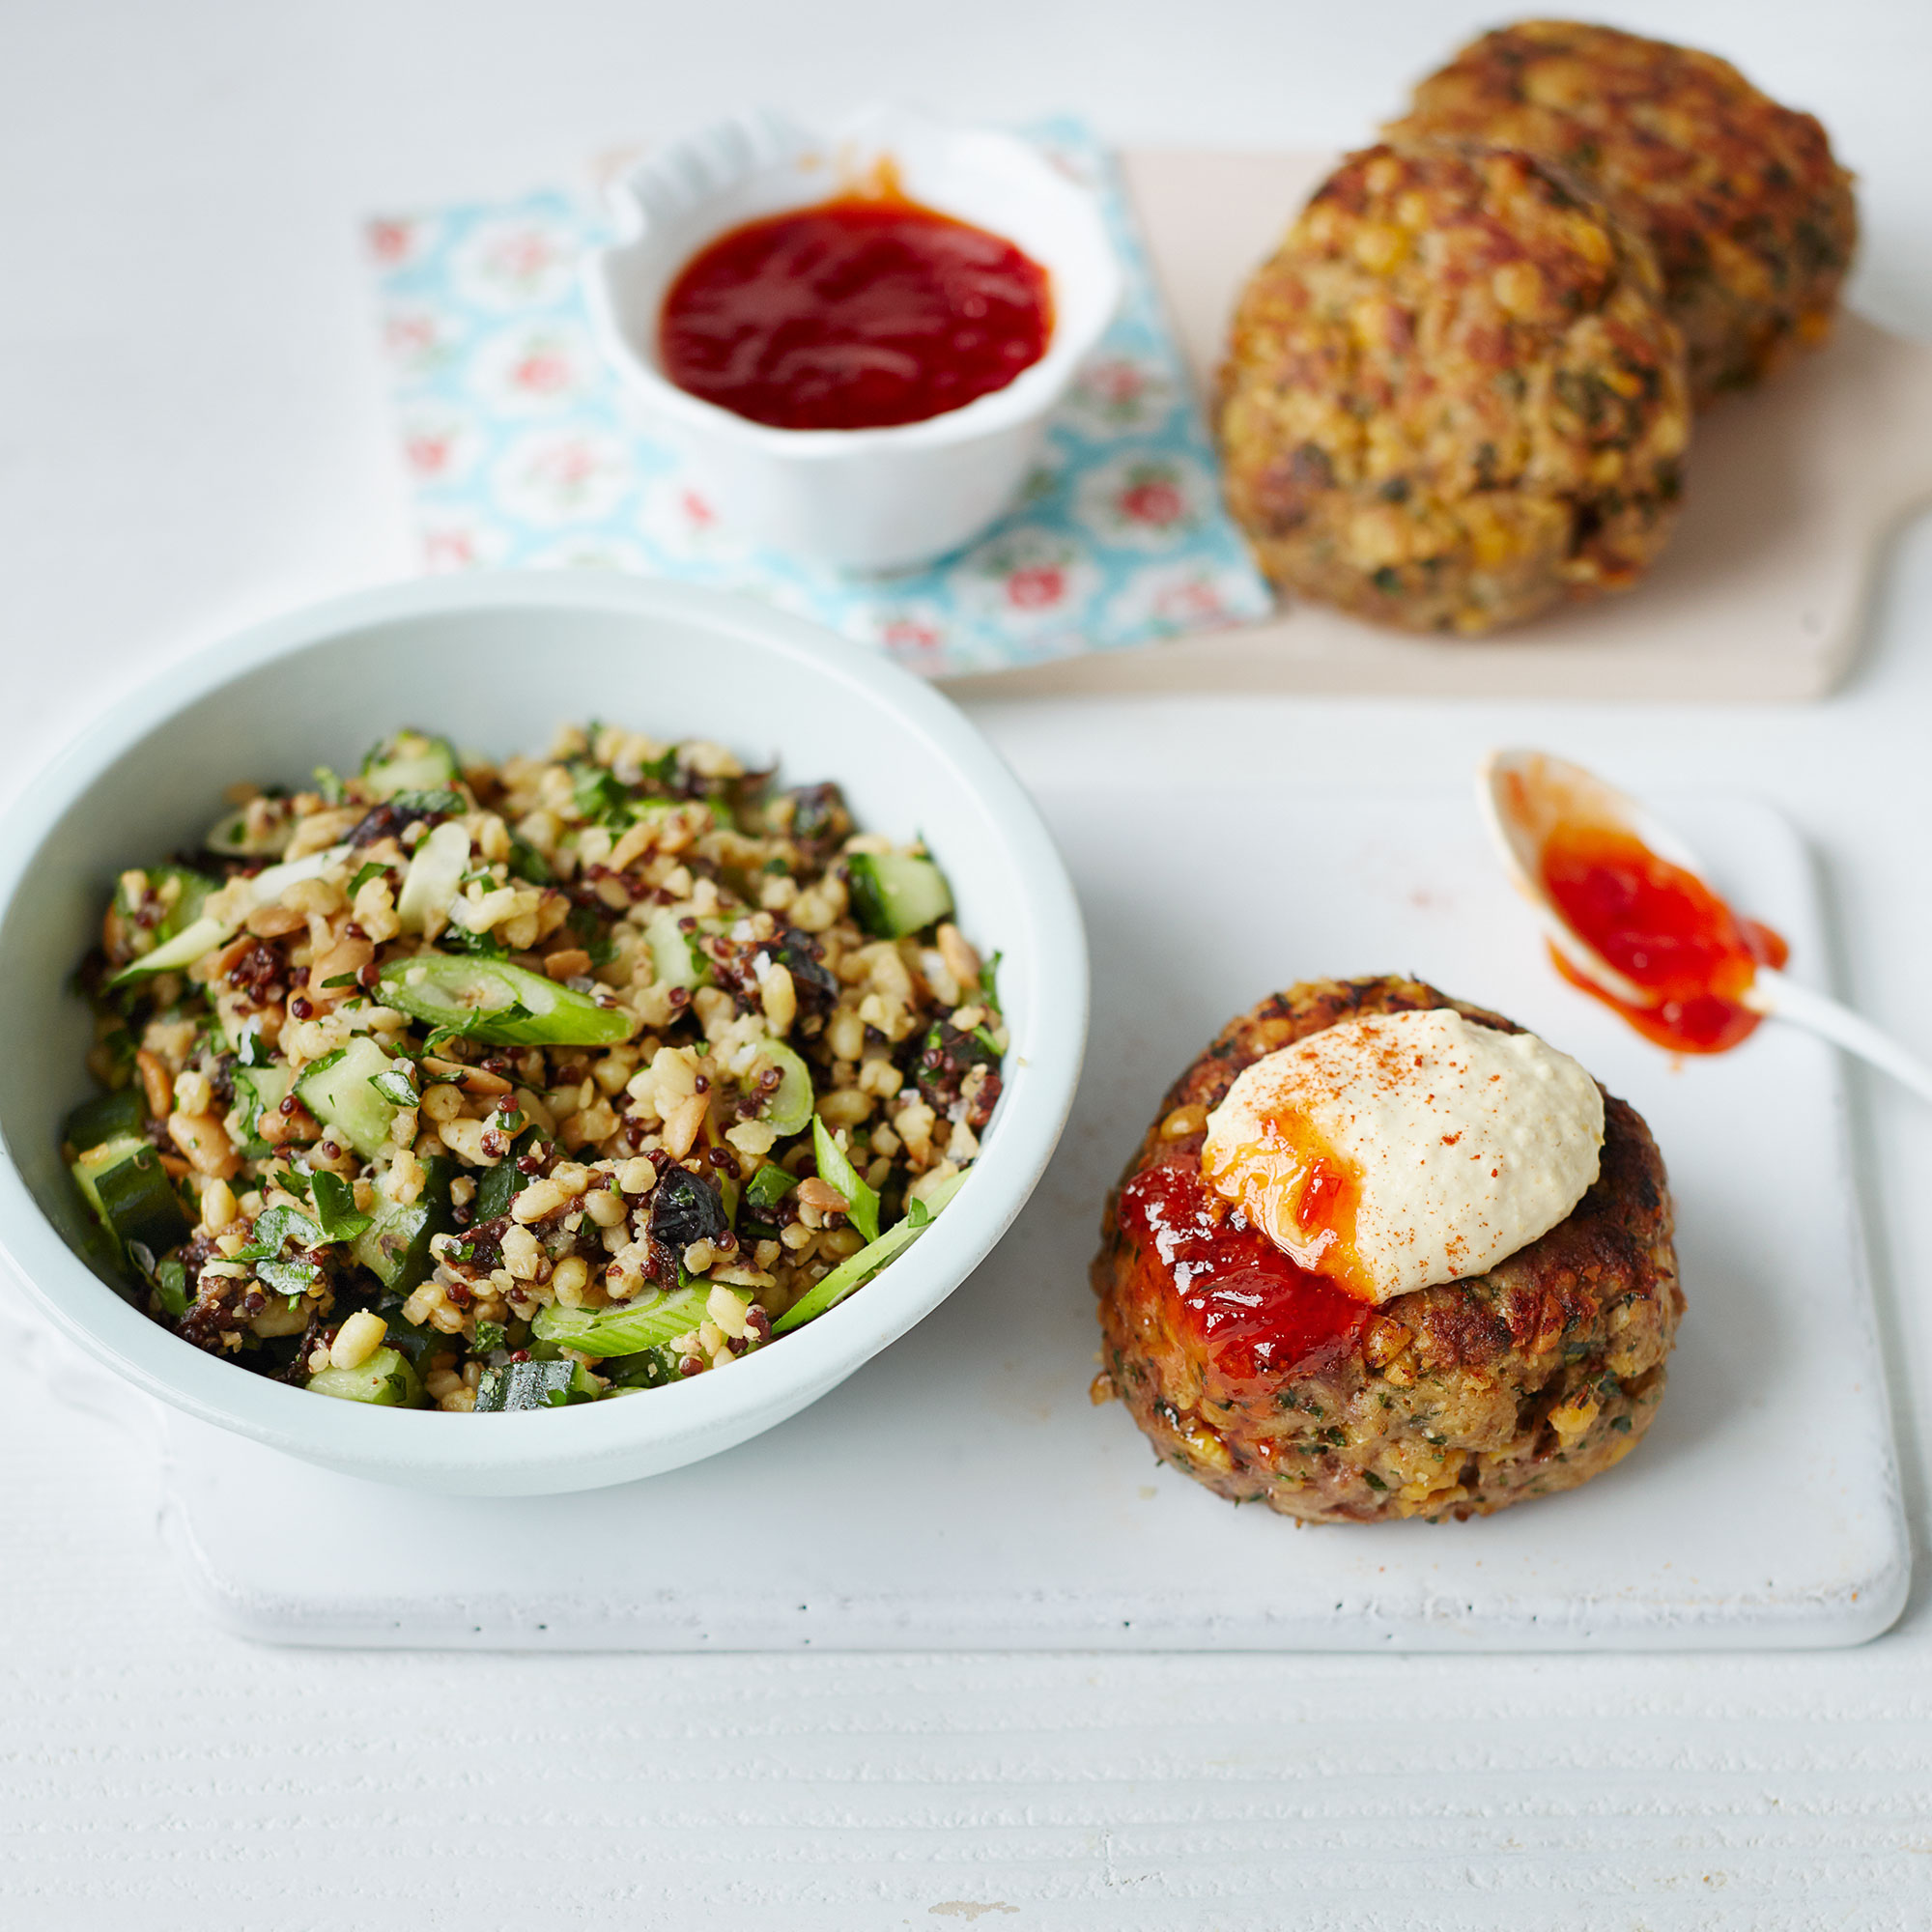 Lamb and Chickpea Burgers with Grain Salad